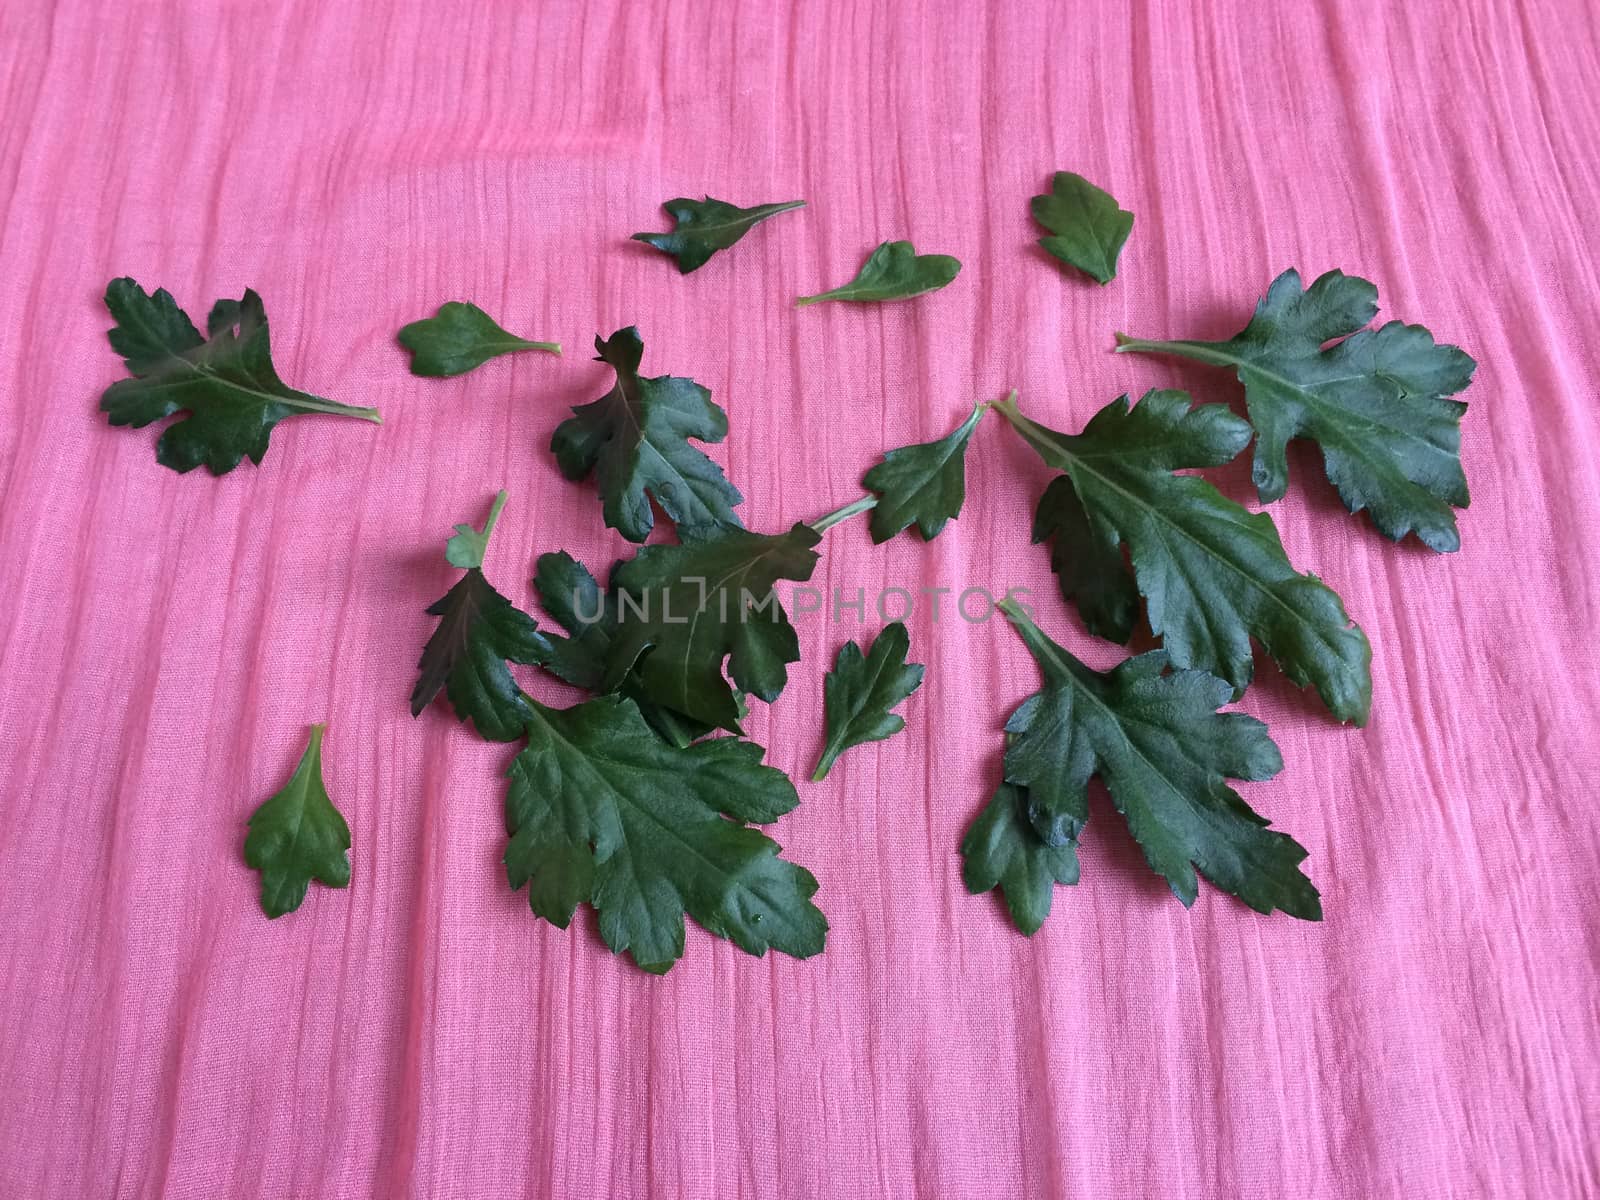 Green daisy leaves on pink fabric